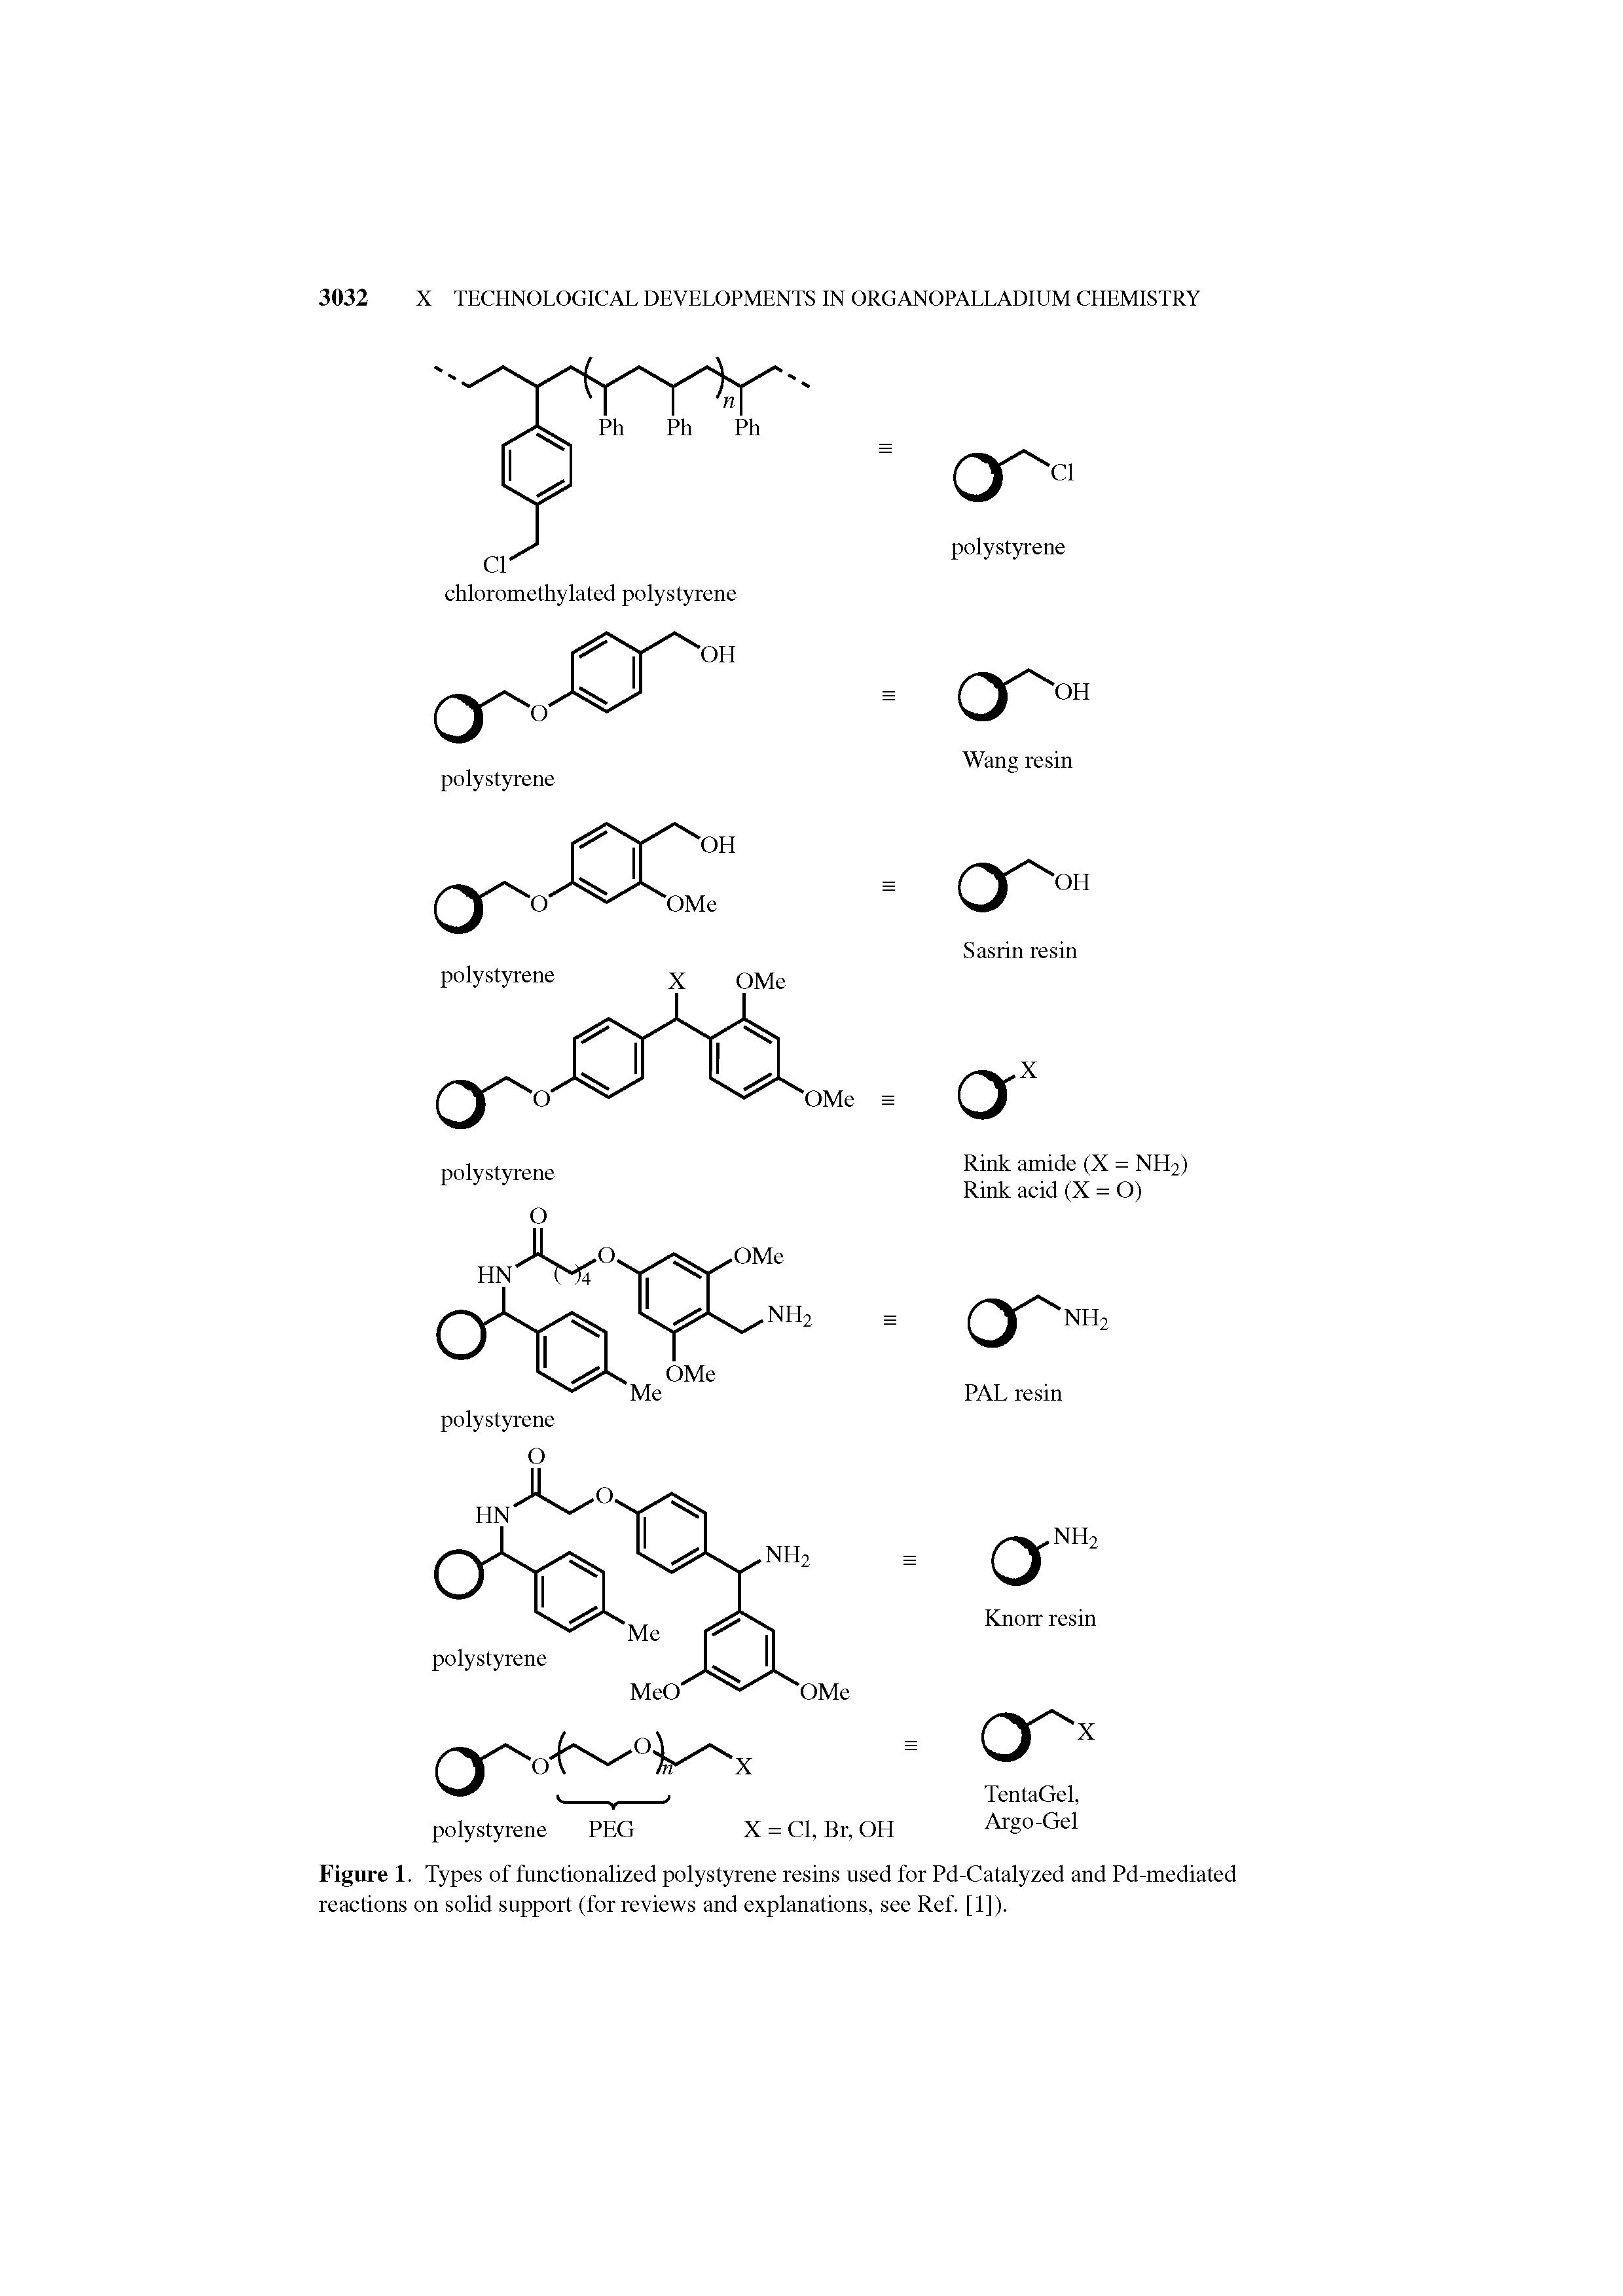 Figure 1. Types of functionalized polystyrene resins used for Pd-Catalyzed and Pd-mediated reactions on solid support (for reviews and explanations, see Ref. [1]).